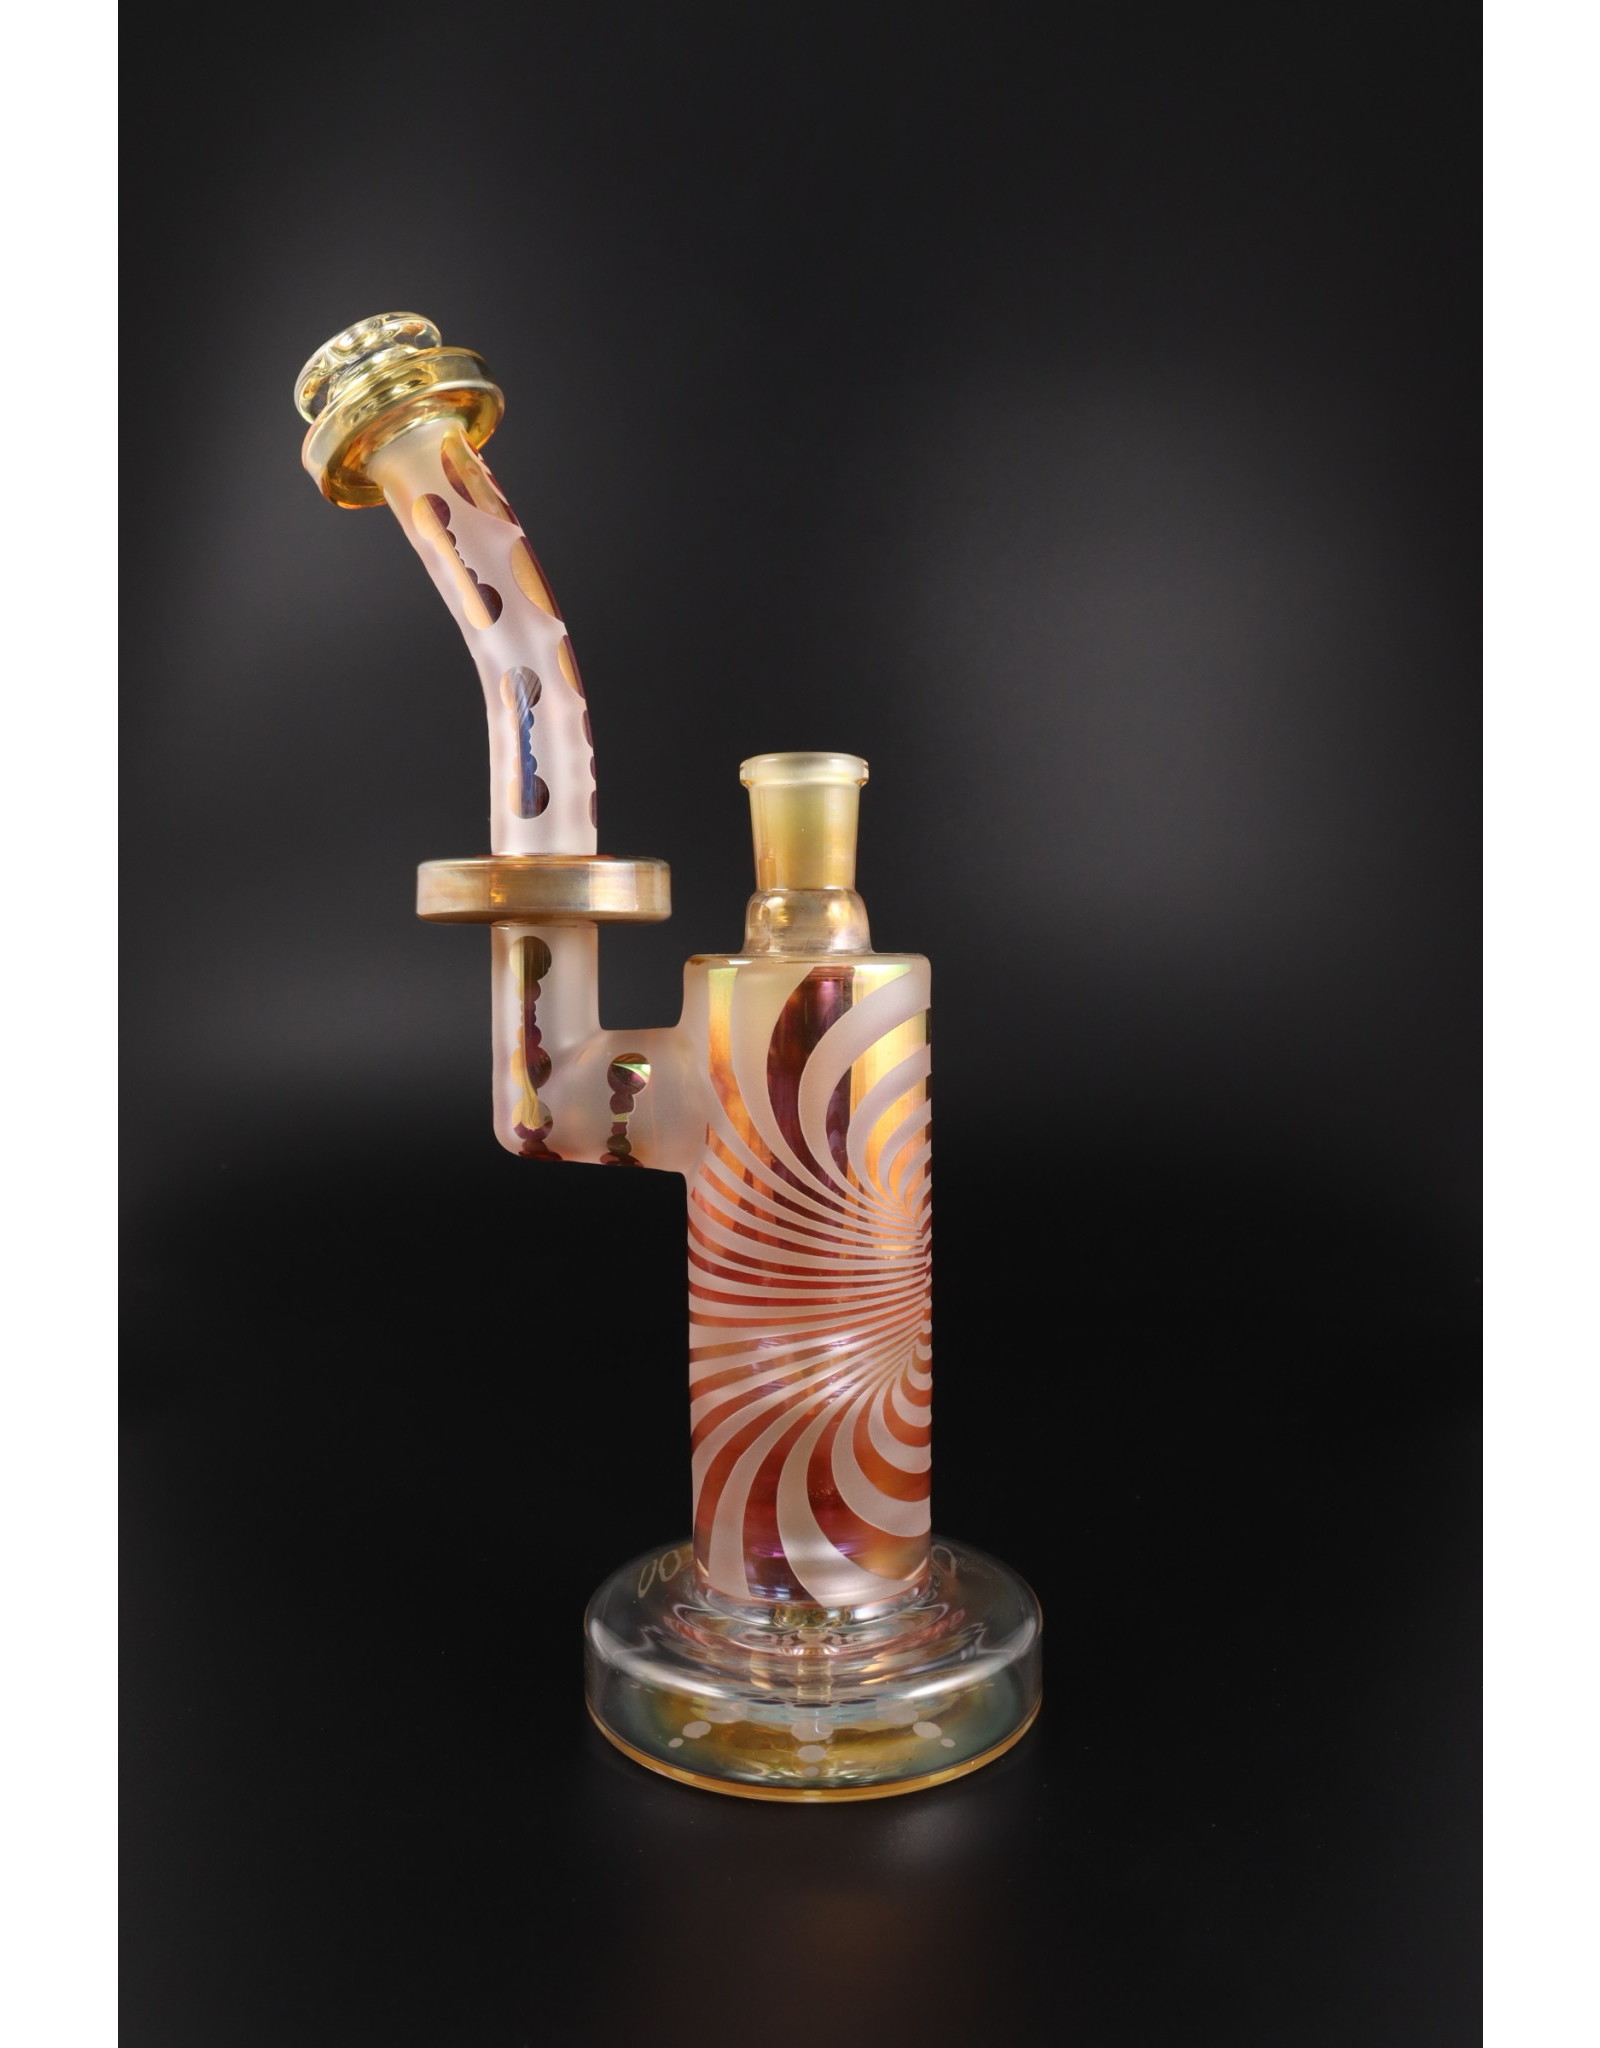 Opinicus9 Limited Edition Roller Rig